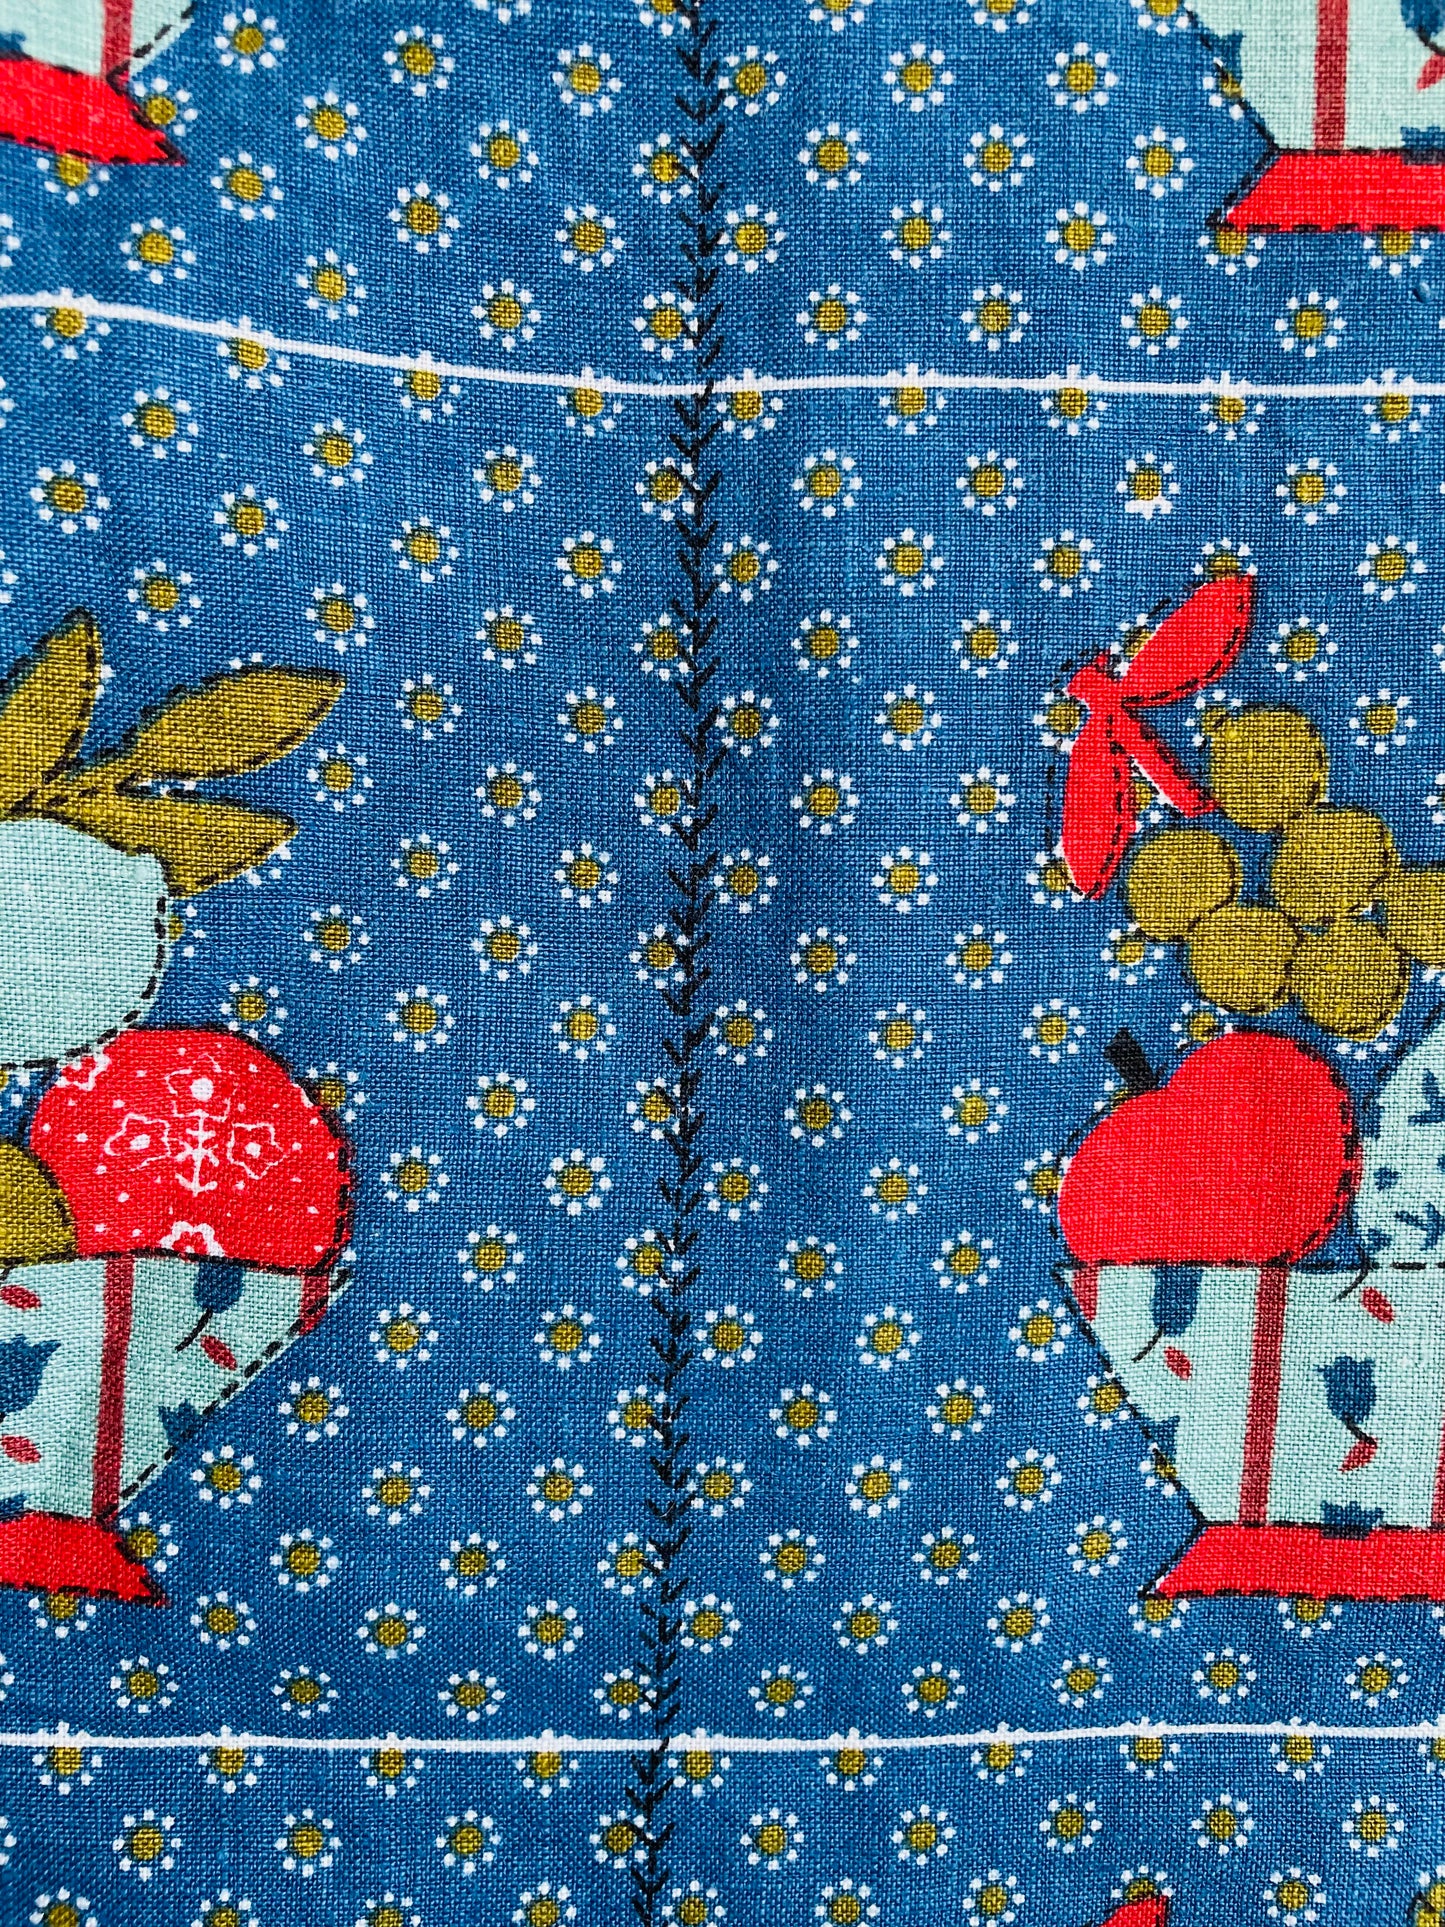 Adorable Blue Linen Tablecloth with Flower Background & Fruit Bowl Graphic - Also Makes Great Fabric!